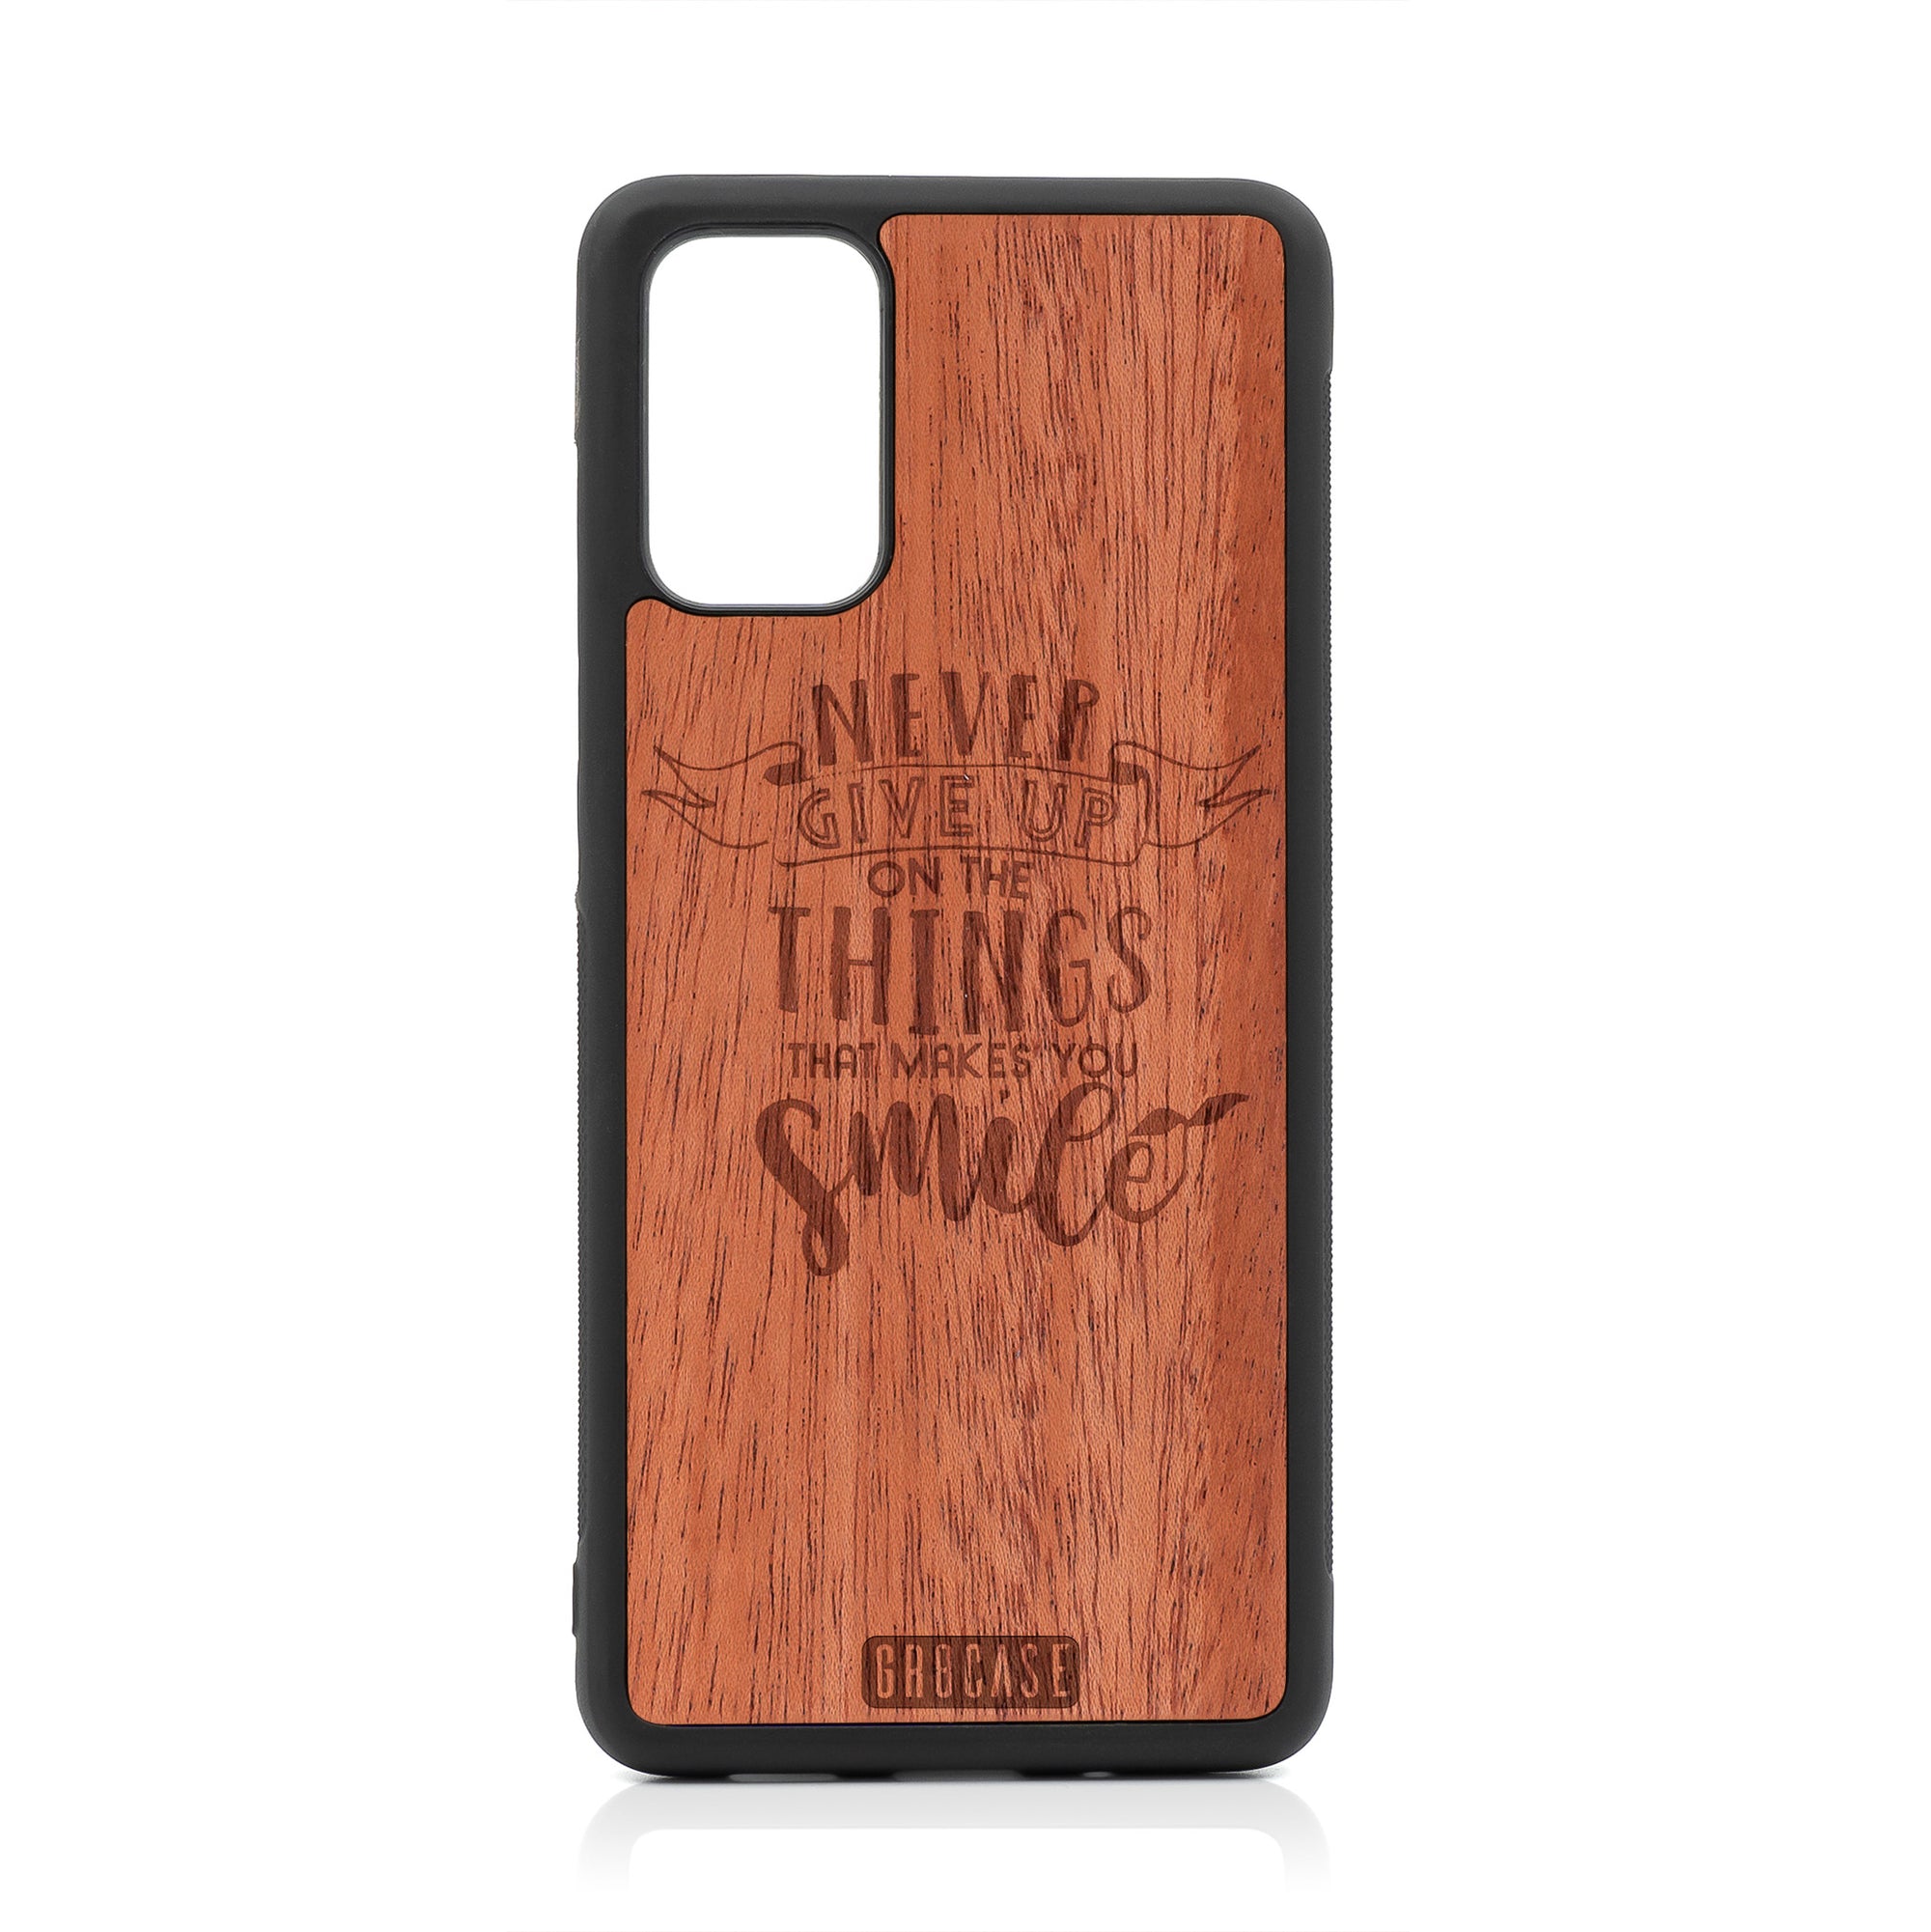 Never Give Up On The Things That Makes You Smile Design Wood Case For Samsung Galaxy S20 Plus by GR8CASE